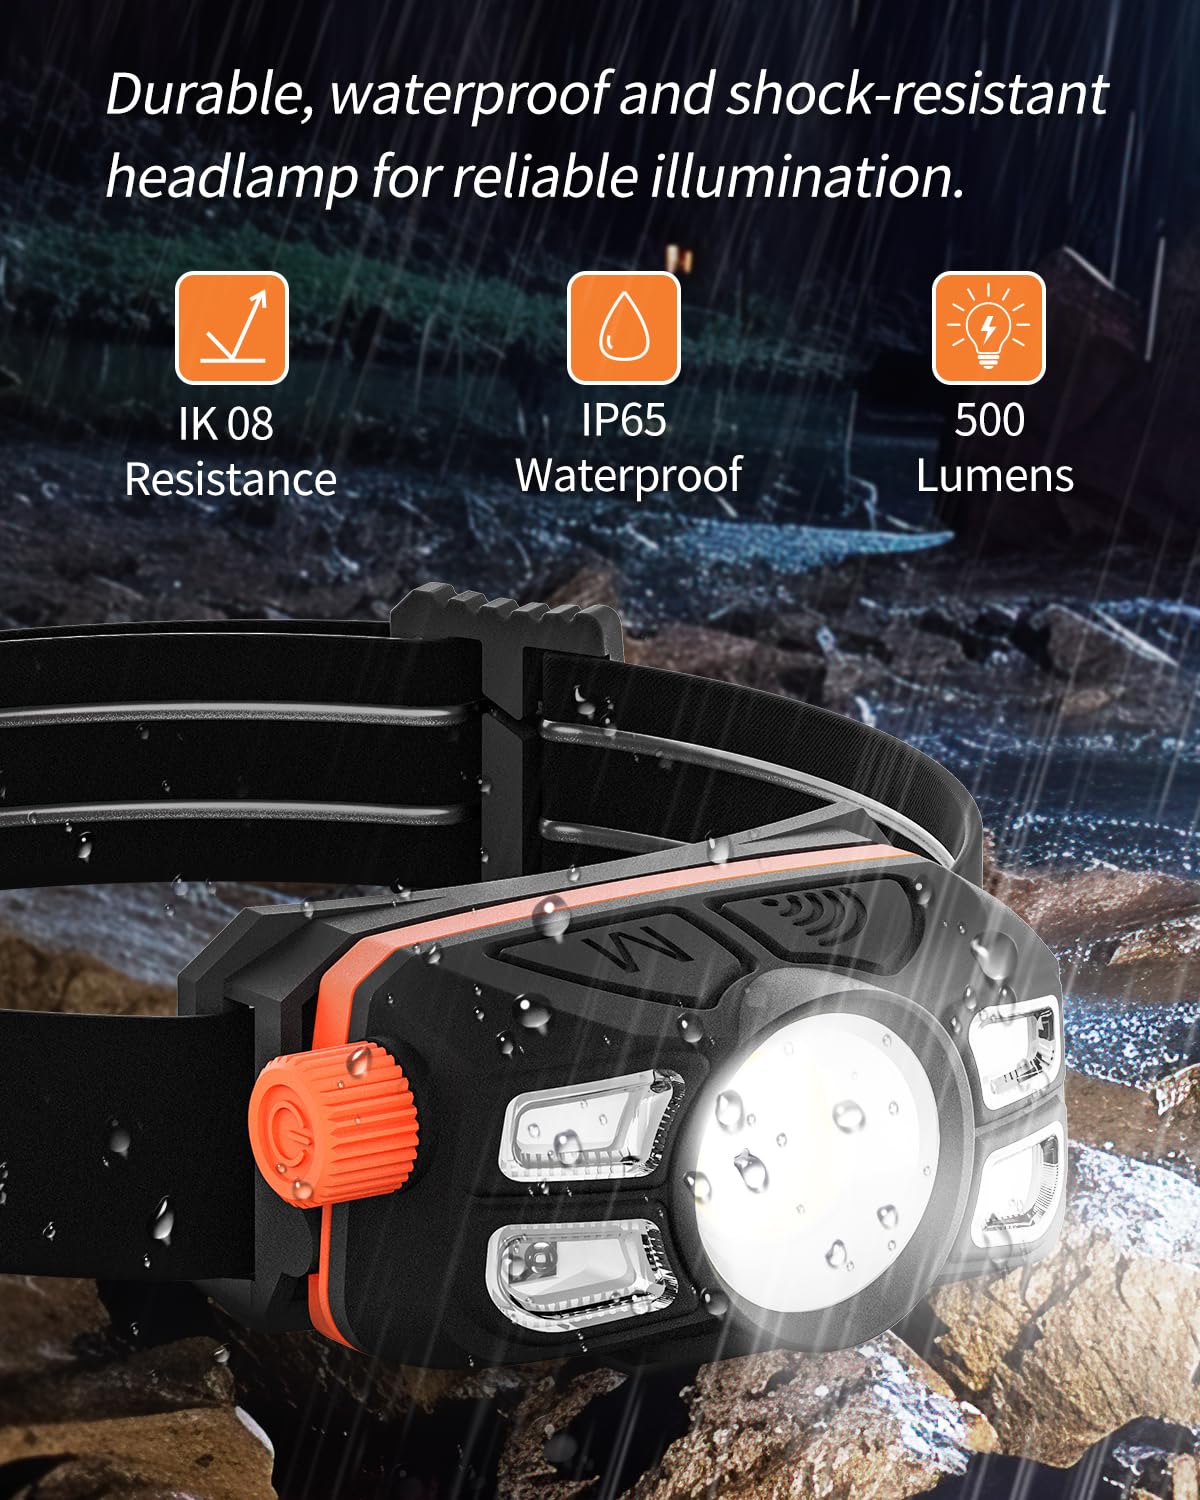 Anylight Rechargeable LED Headlamp with Stepless Dimming and Motion Sensor, IP65 Waterproof Headlight for Repairing, Running, Camping, Hiking(2 Packs)